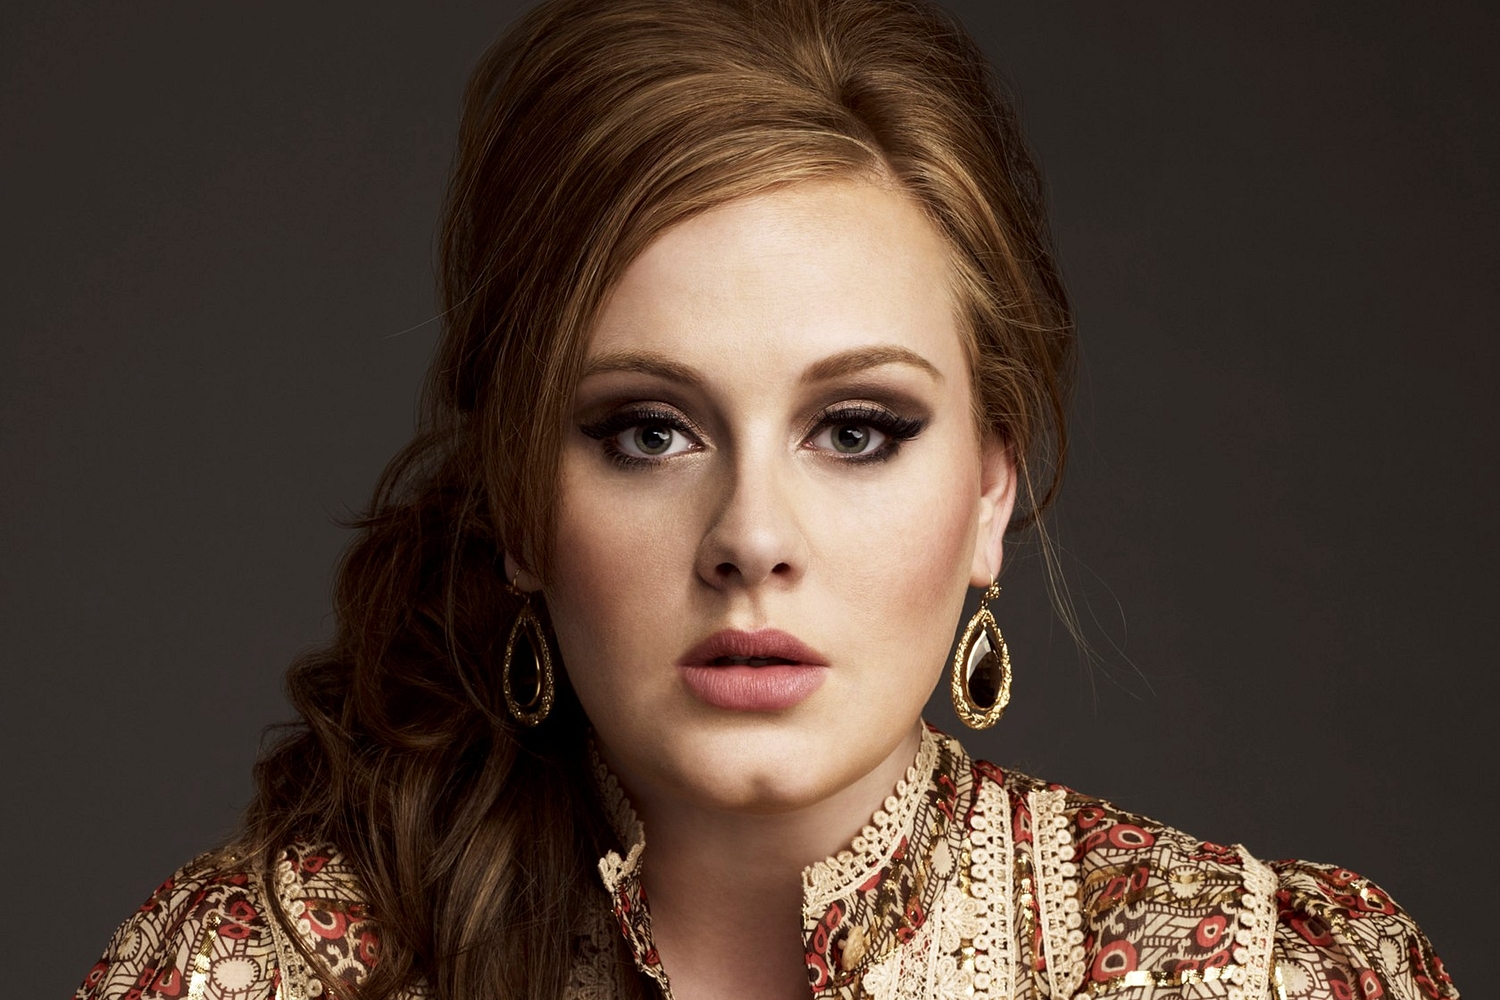 Adele might be releasing her first new single this Friday